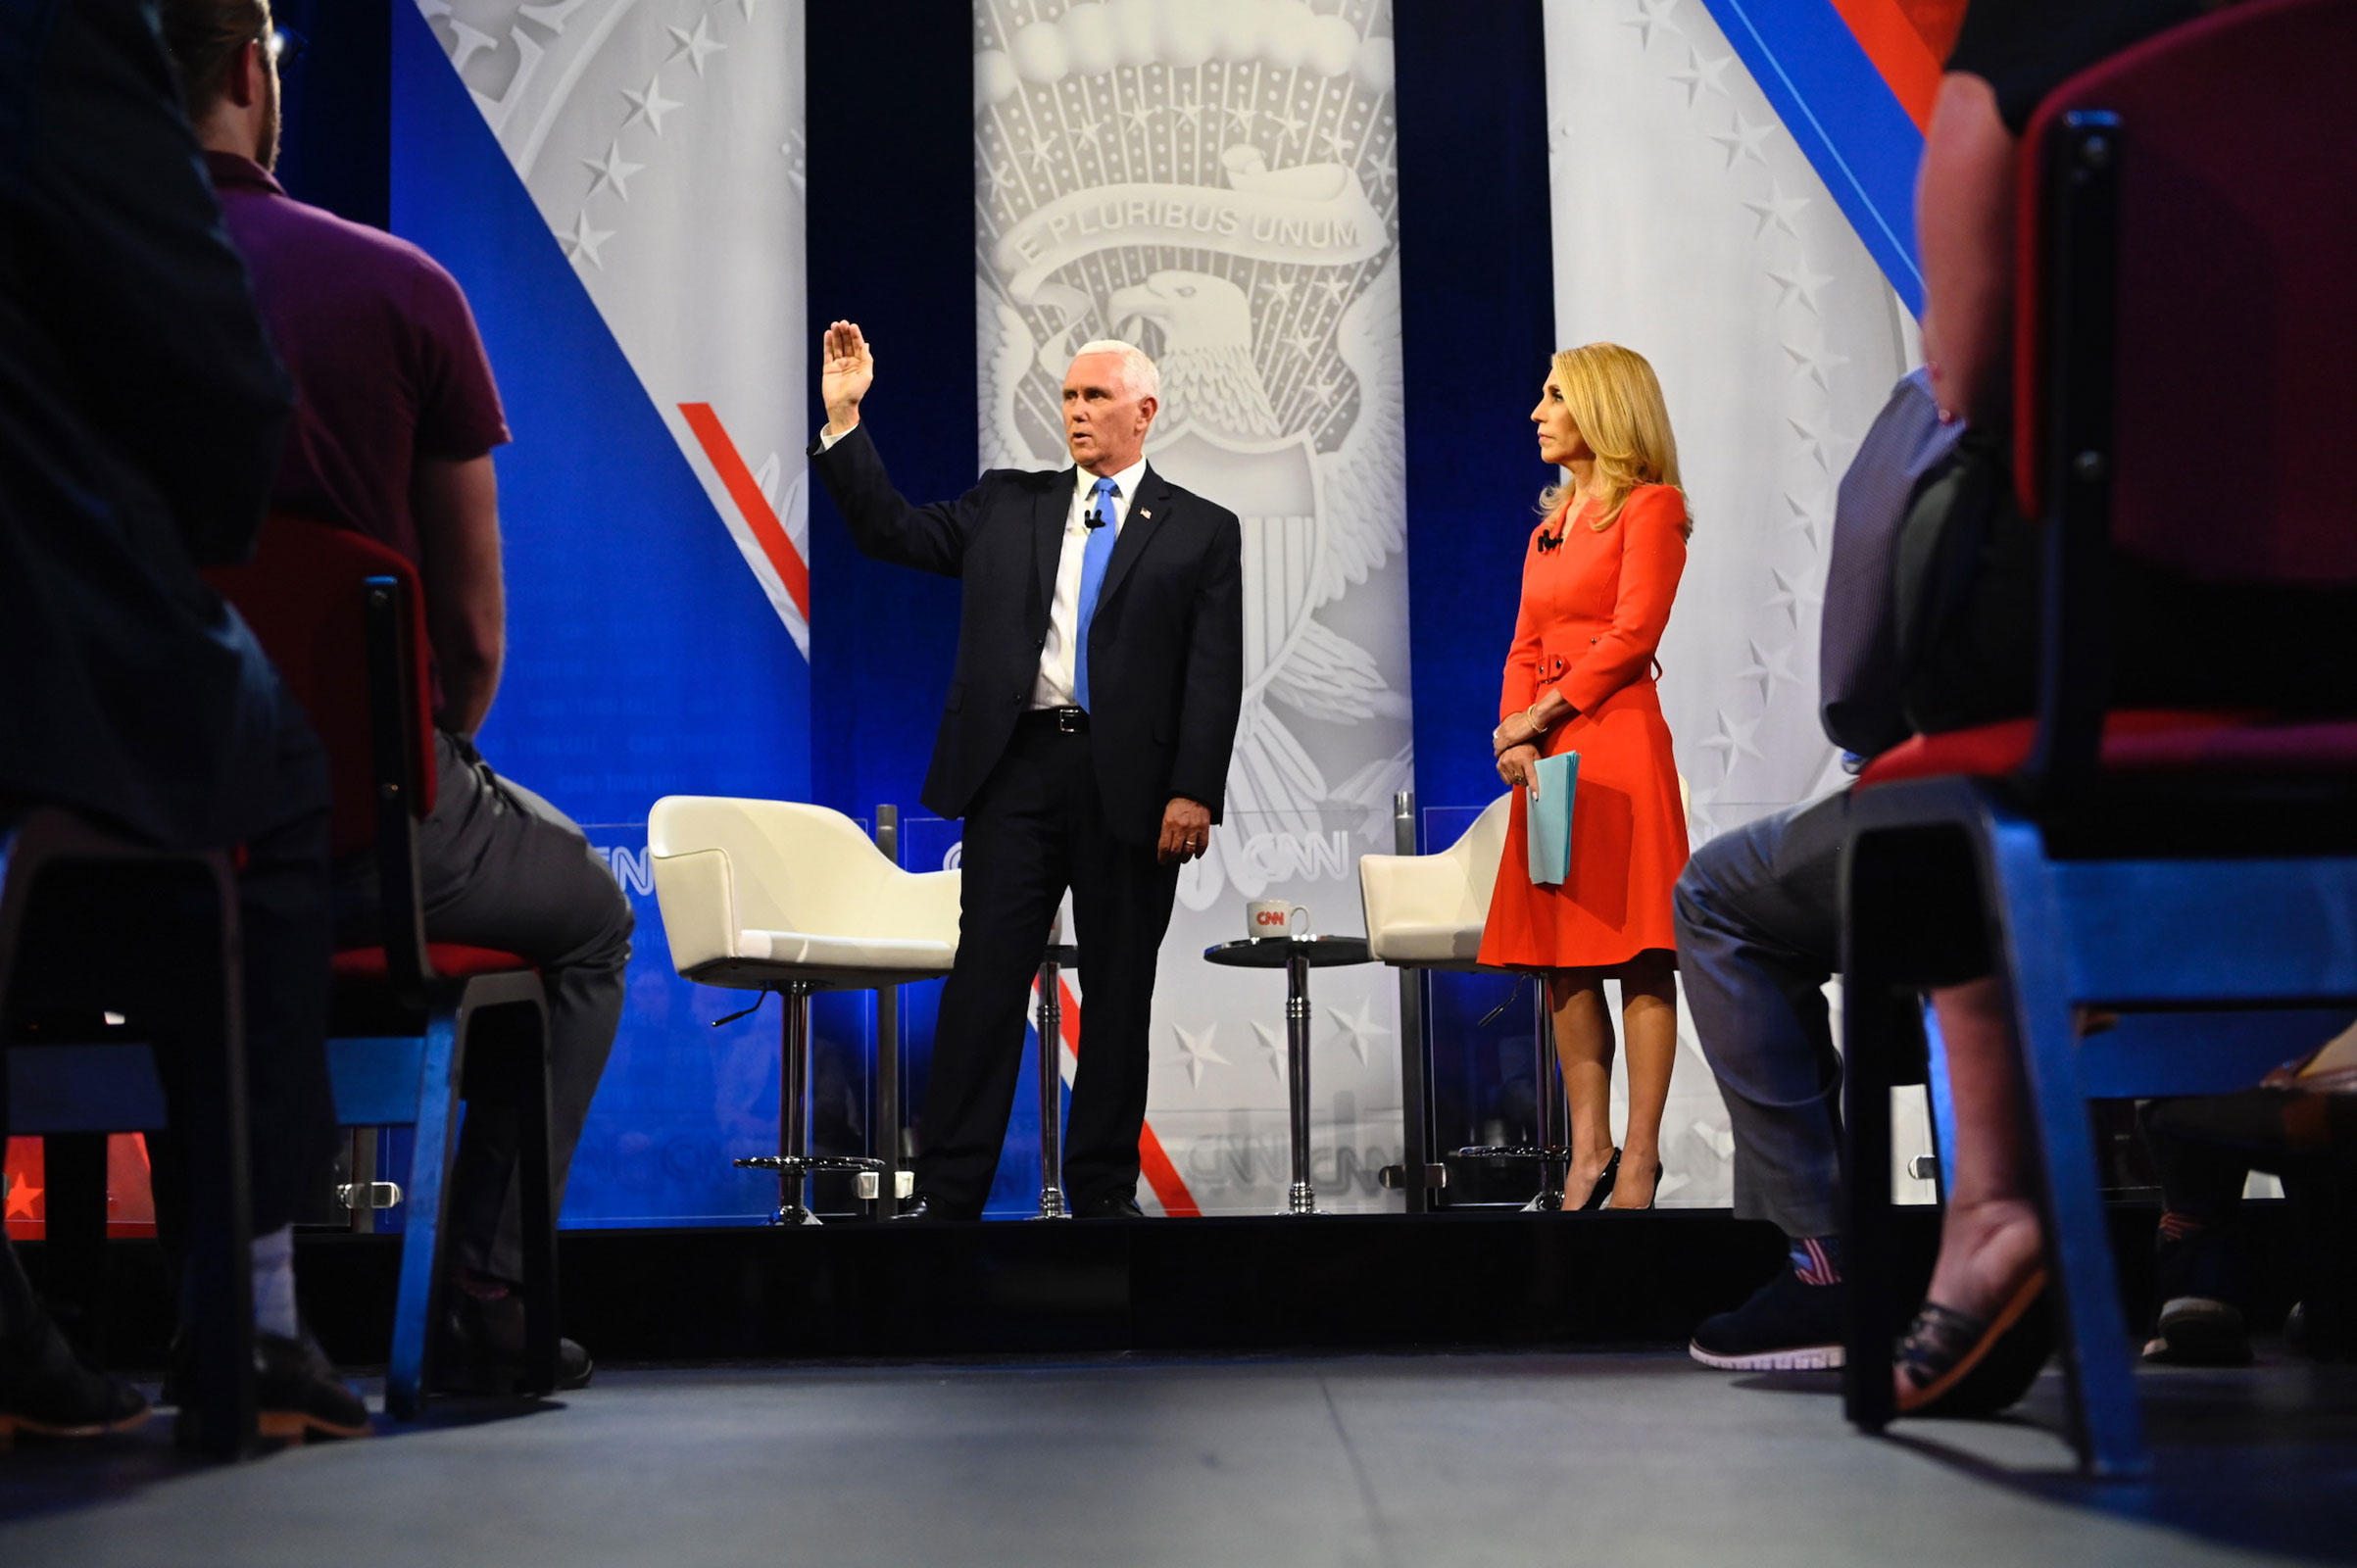 Mike Pence gestures while answering a question while on stage with CNN's Dana Bash.